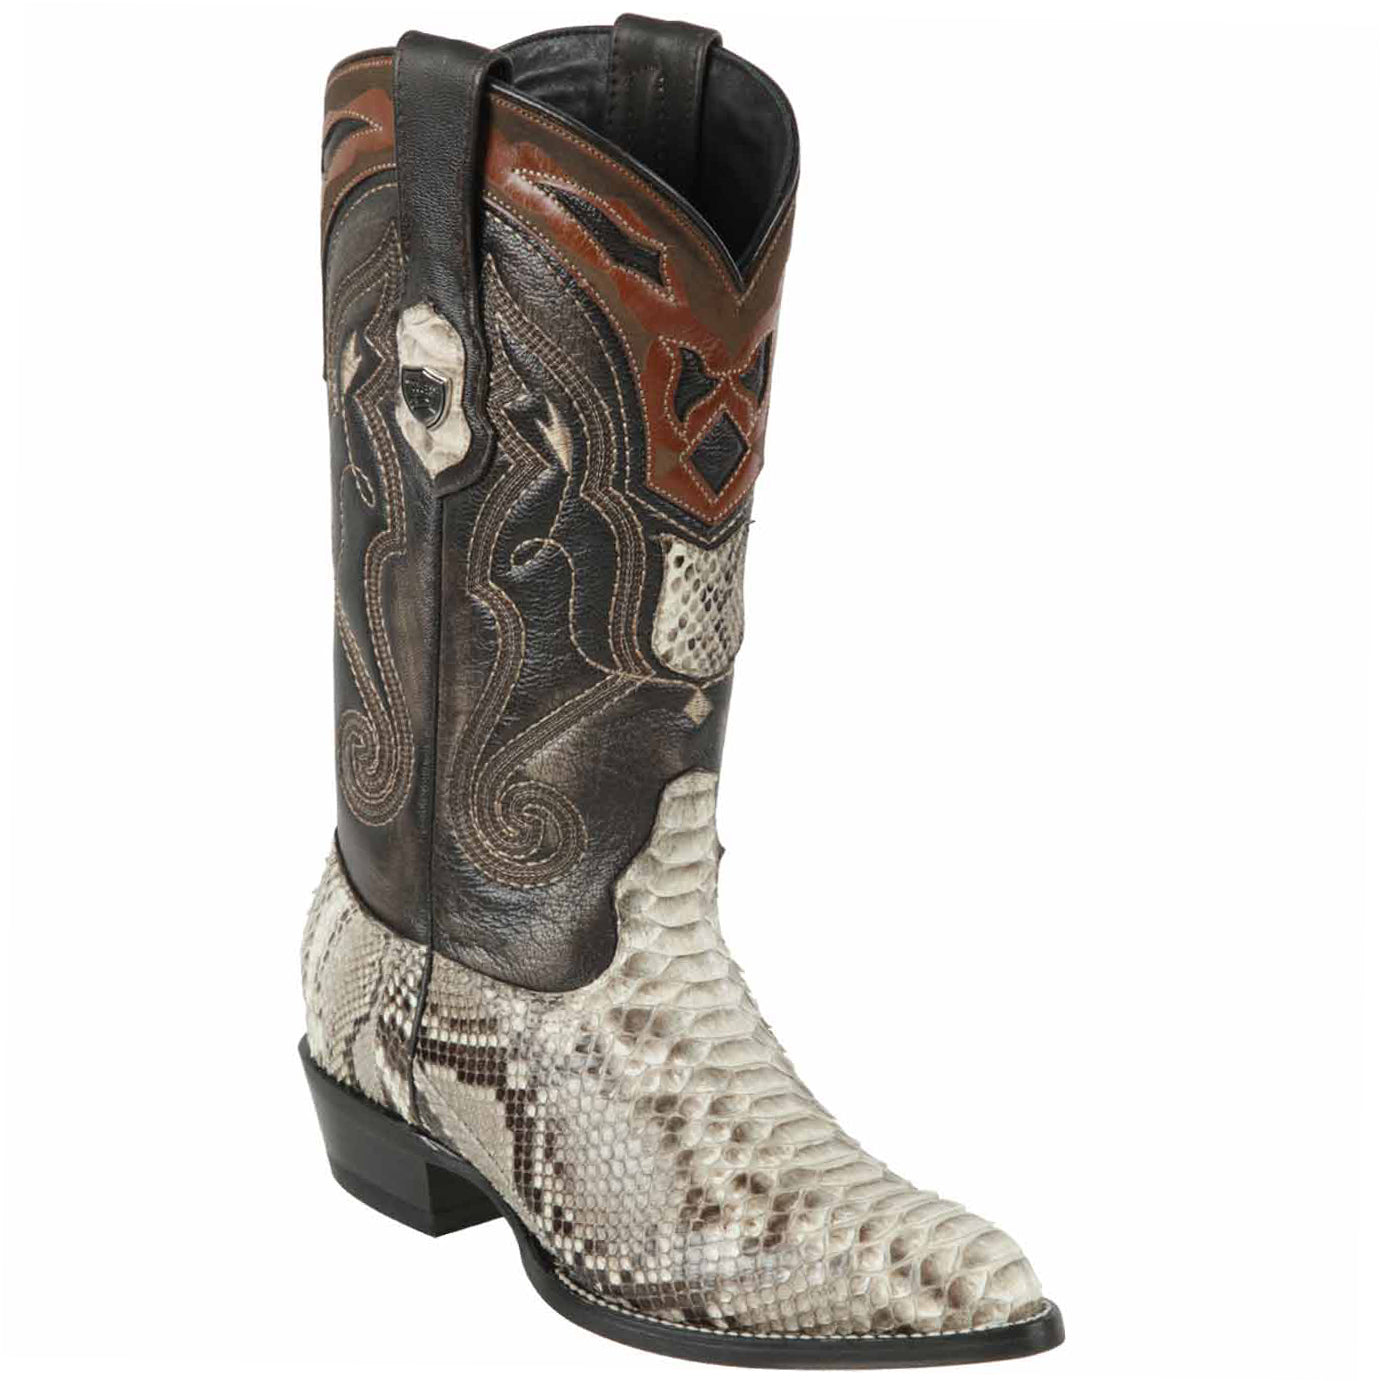 Wild West Boots - Cowboy Boots Snakeskin J-Toe Natural